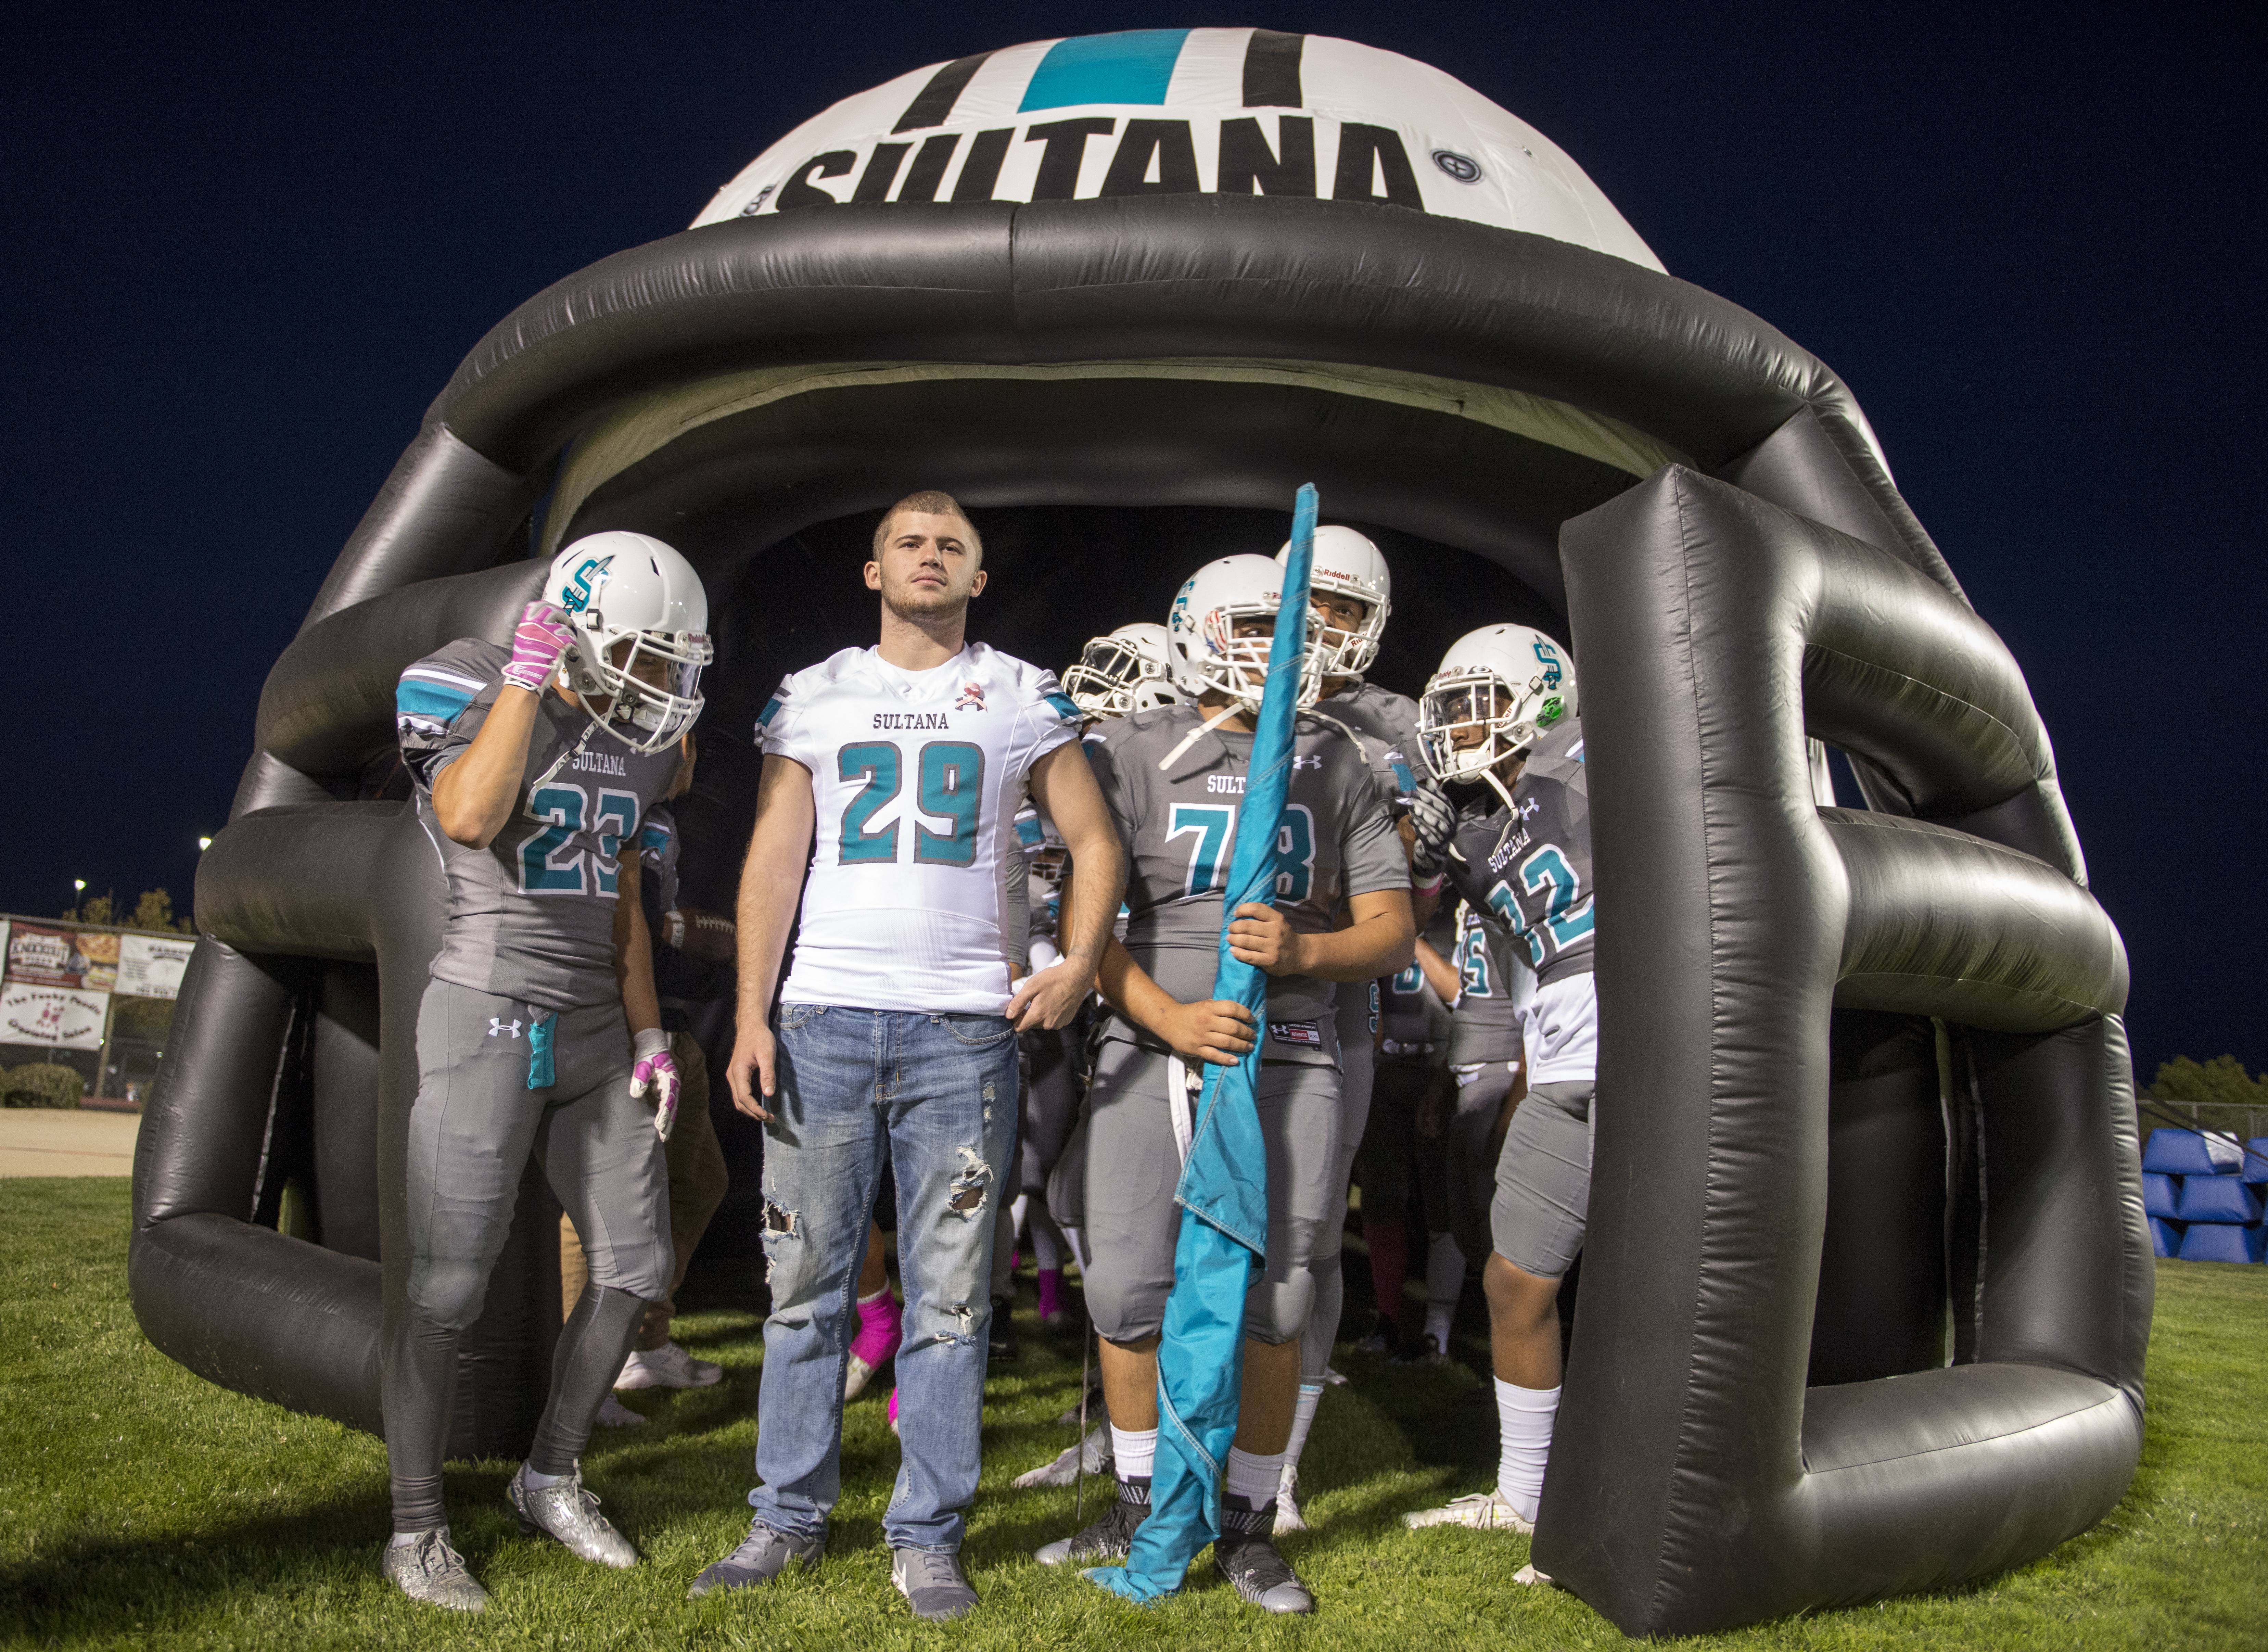 Bruce Henderson, wearing number 29 prepares to lead the Sultana Sultans onto the field. Henderson made his first appearance at a school football game on Friday October 7, 2016 after suffering a major head injury. (James Quigg, Daily Press) [Via MerlinFTP Drop]